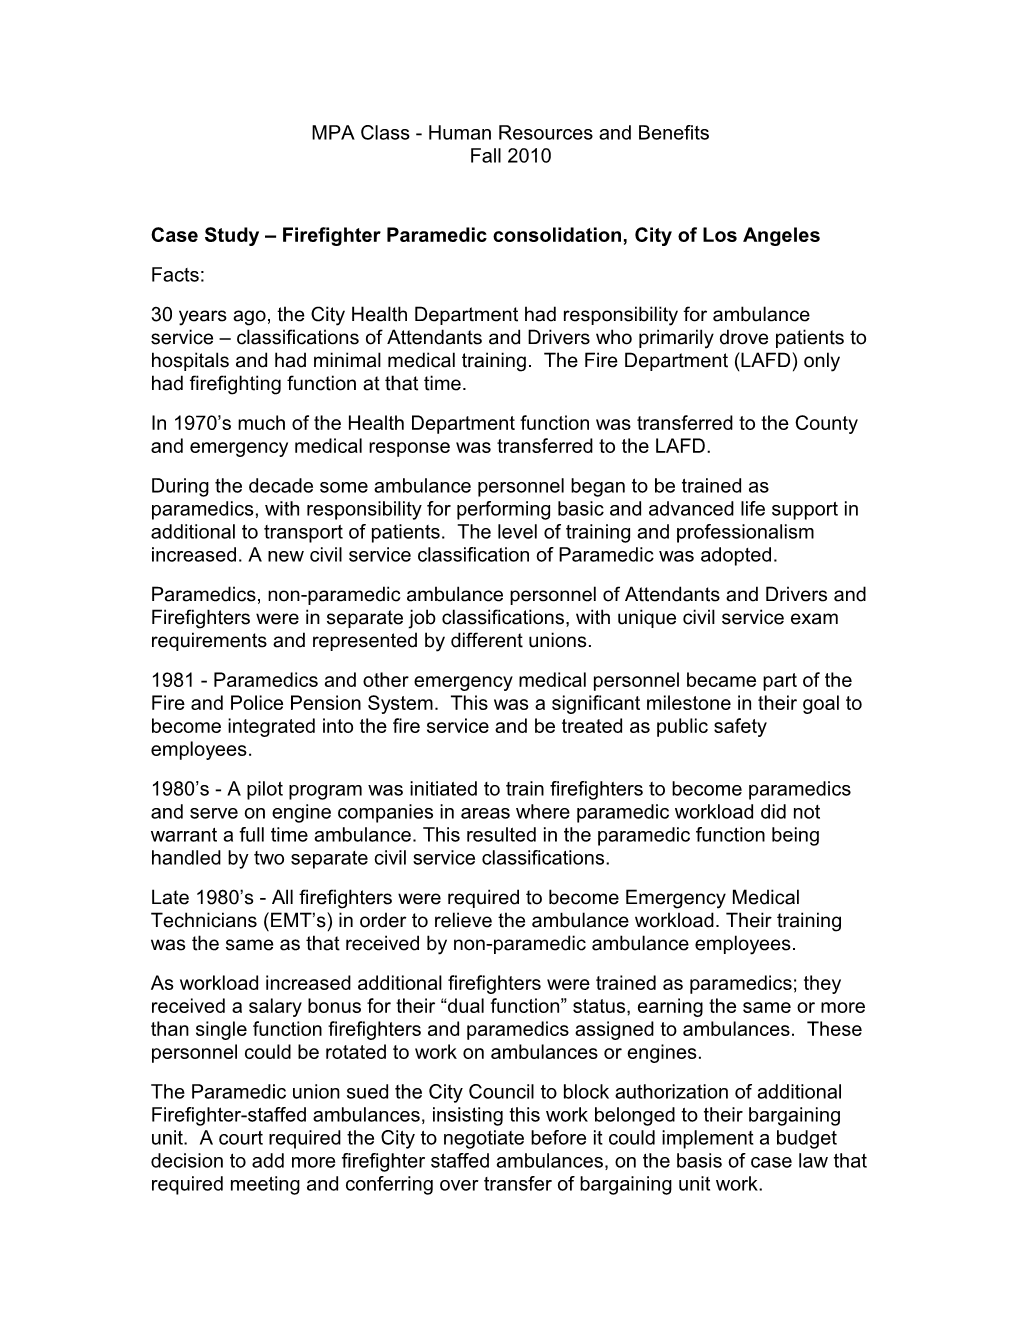 Case Study Firefighter Paramedic Consolidation,City of Los Angeles